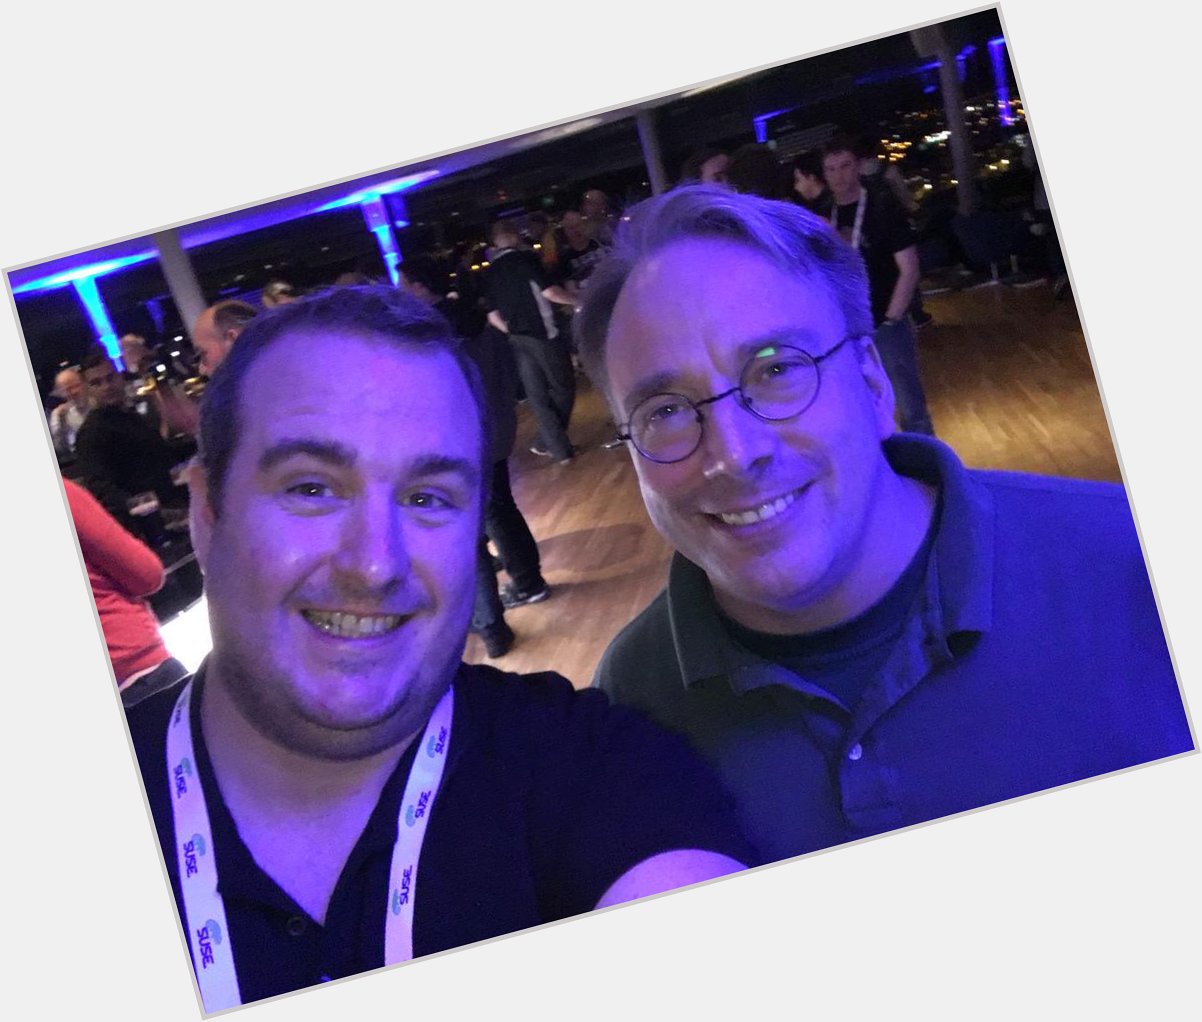 Happy Birthday Linus Torvalds! Creator of Linux. I had the pleasure of meeting him earlier this year. 